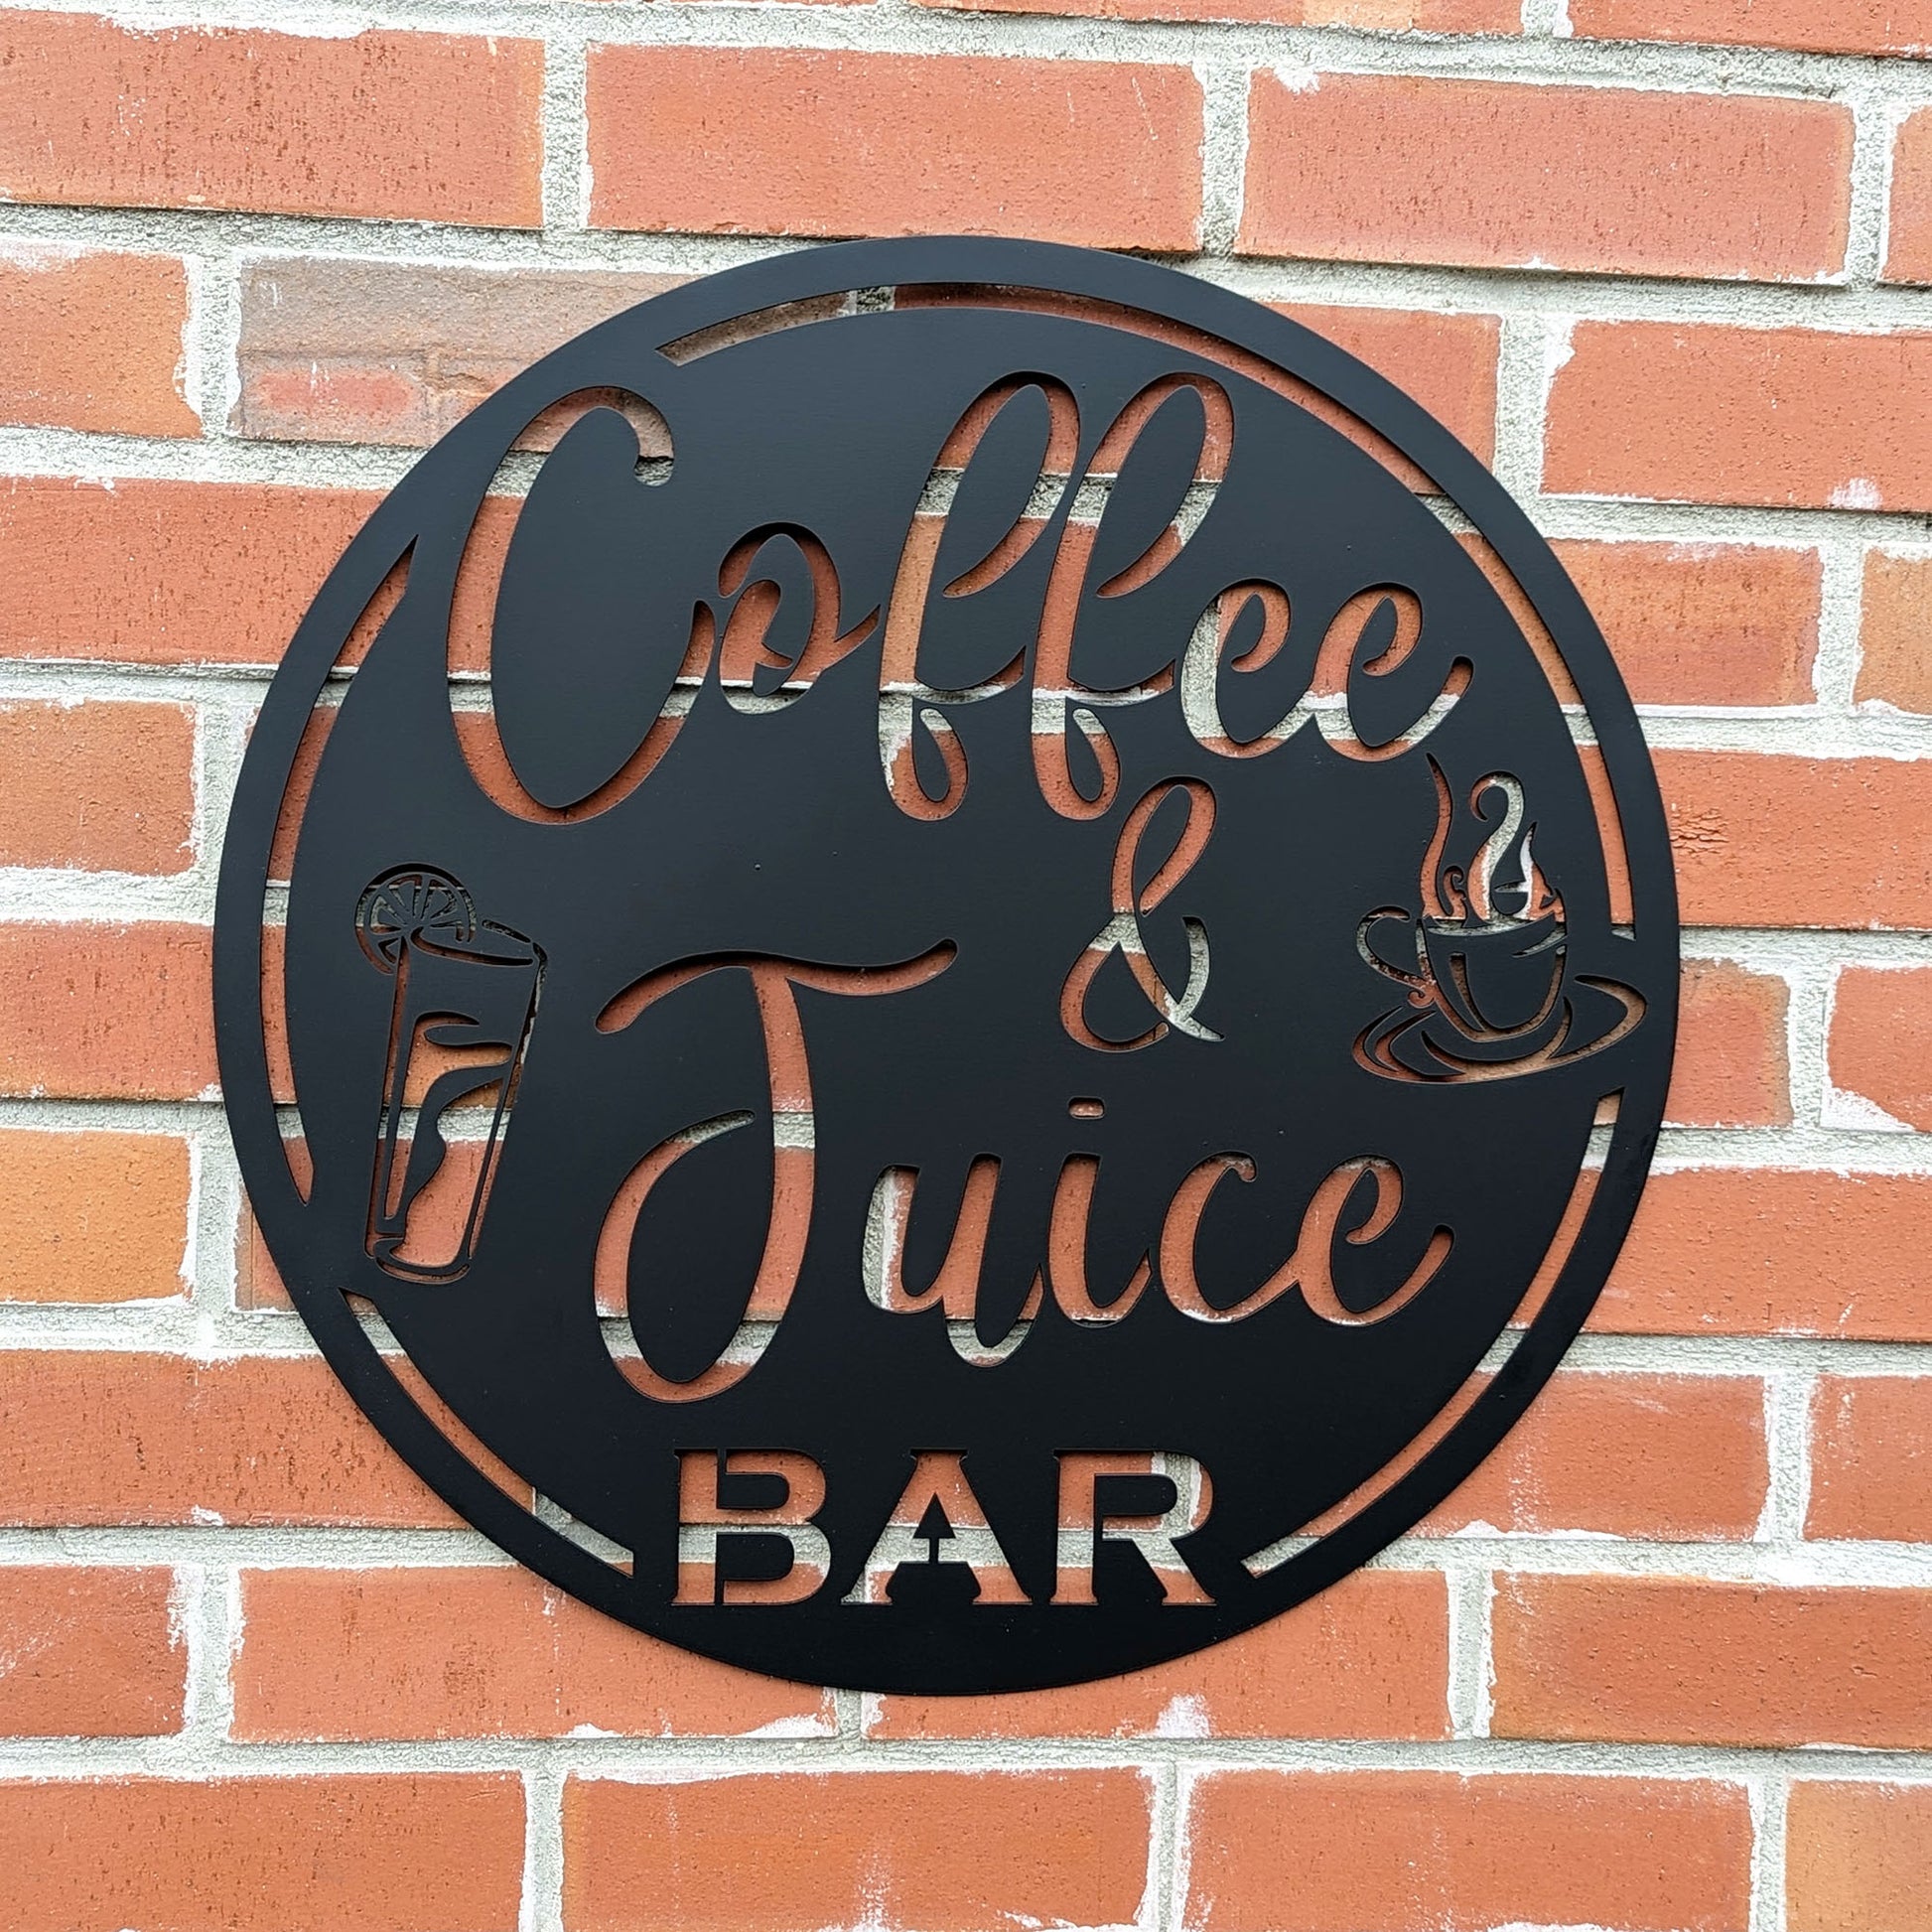 Coffee & Juice Bar Round Metal Sign in black on brick wall background